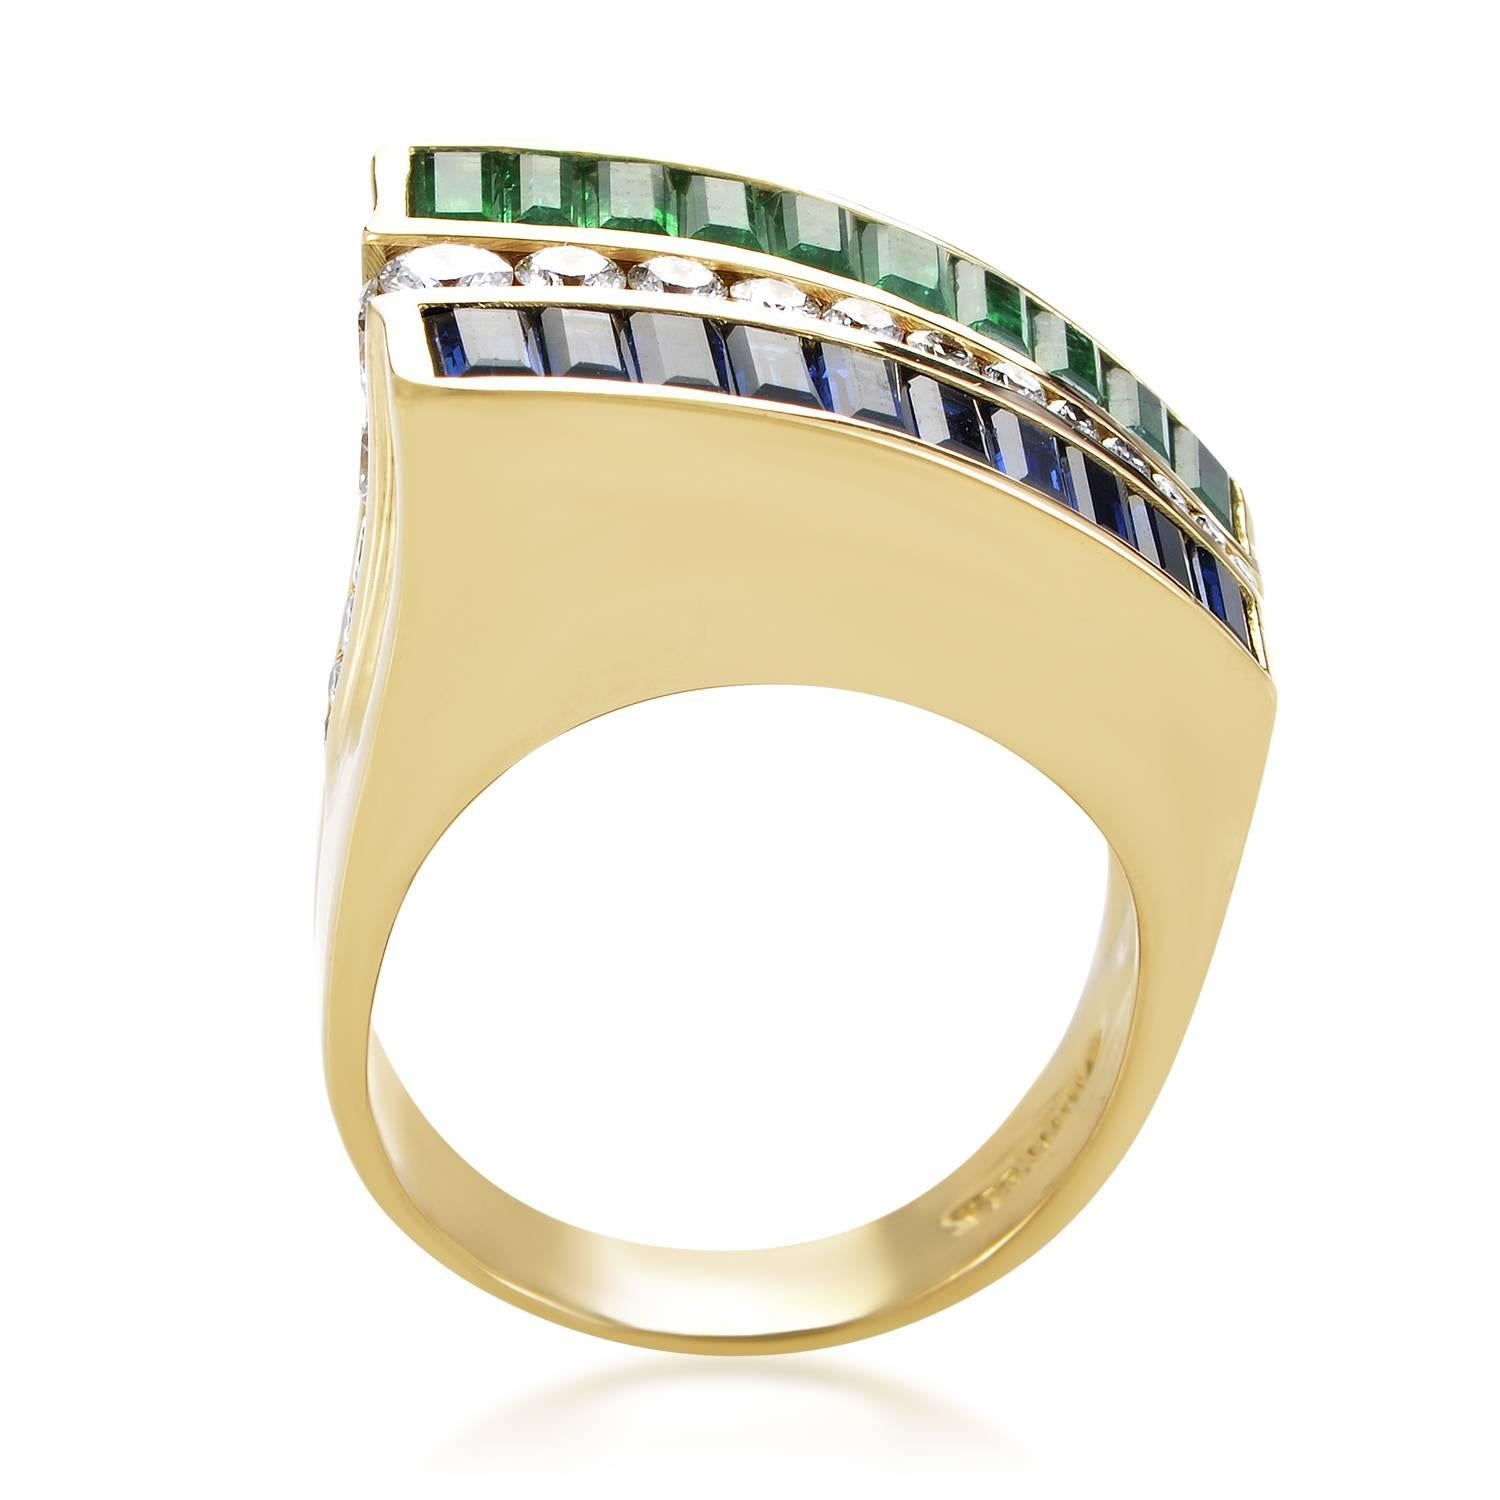 With brilliant diamonds totaling 0.65ct lined neatly to separate and emphasize the alluring gems on the sides, this exquisite ring from Charles Krypell complements luxurious 18K yellow gold with emeralds weighing in total 1.70 carats and sapphires